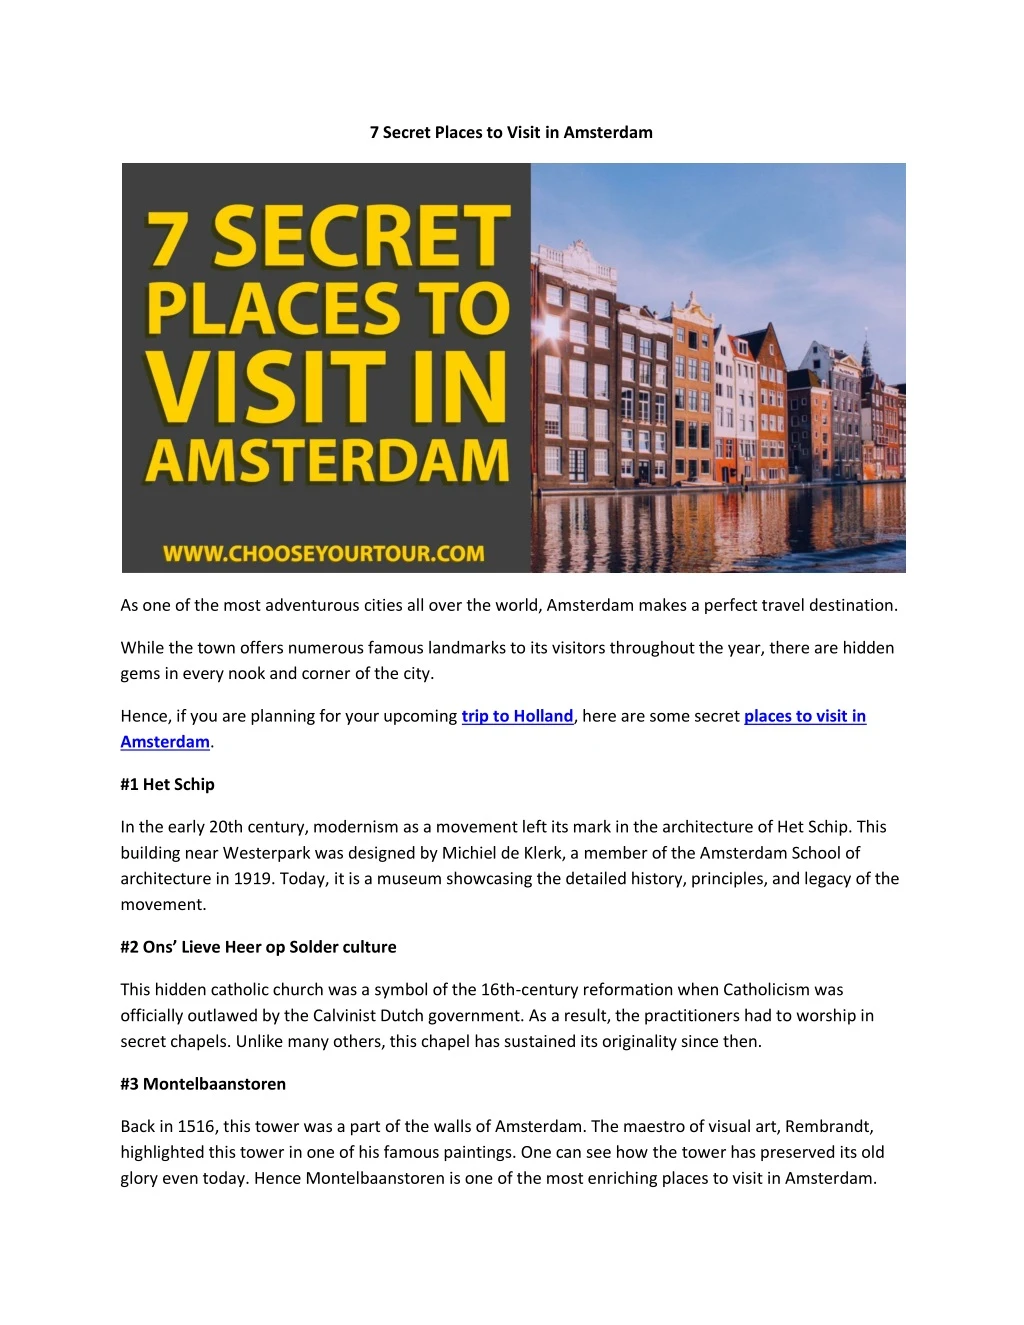 7 secret places to visit in amsterdam